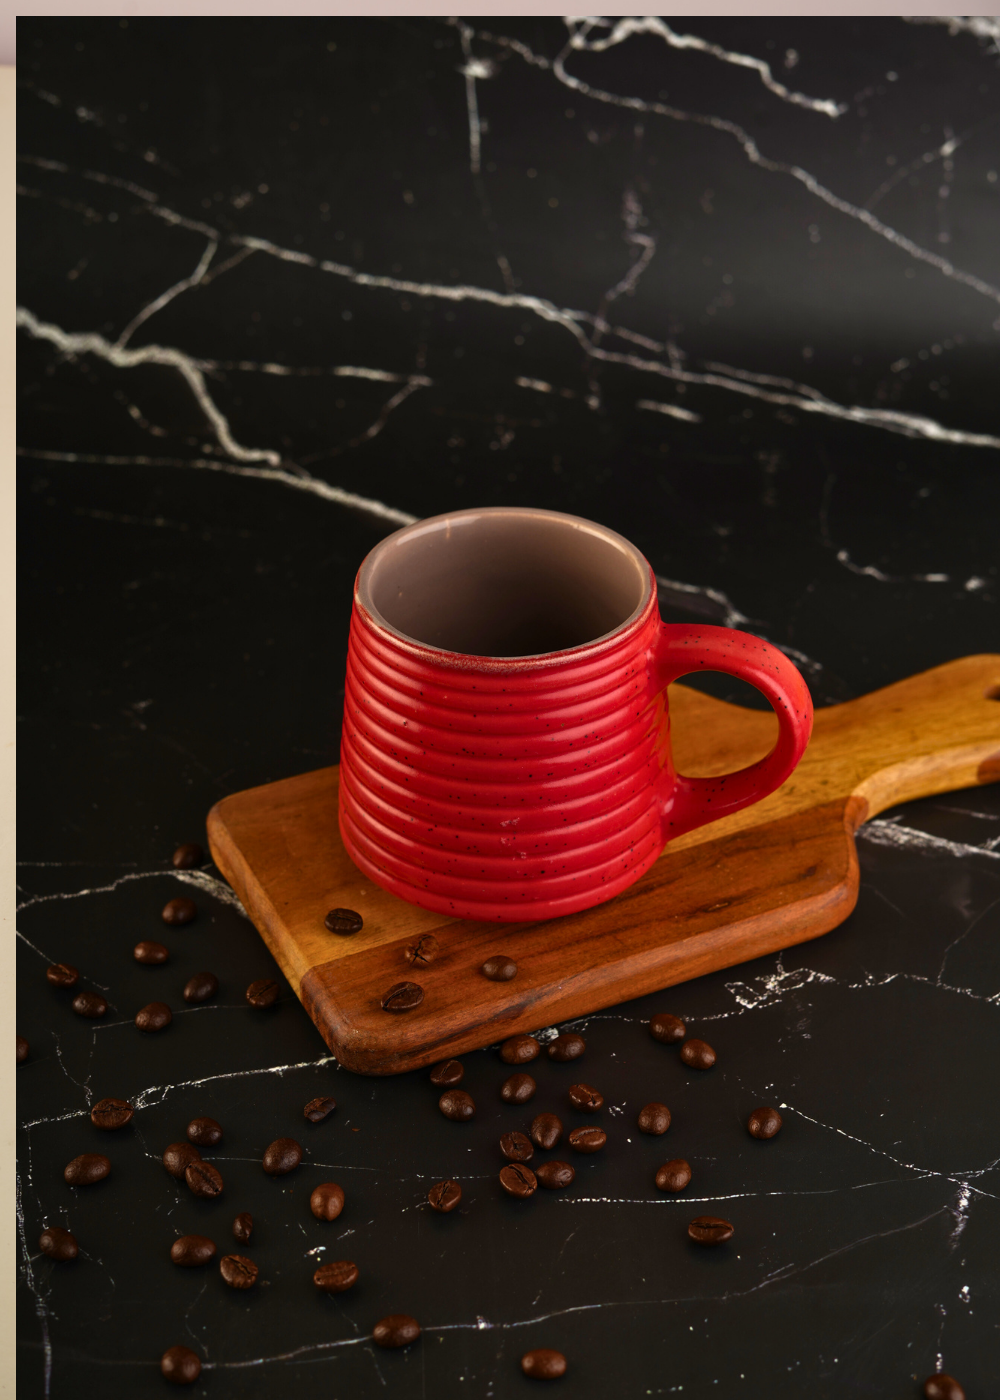 Hot red coffee mug on wooden surface